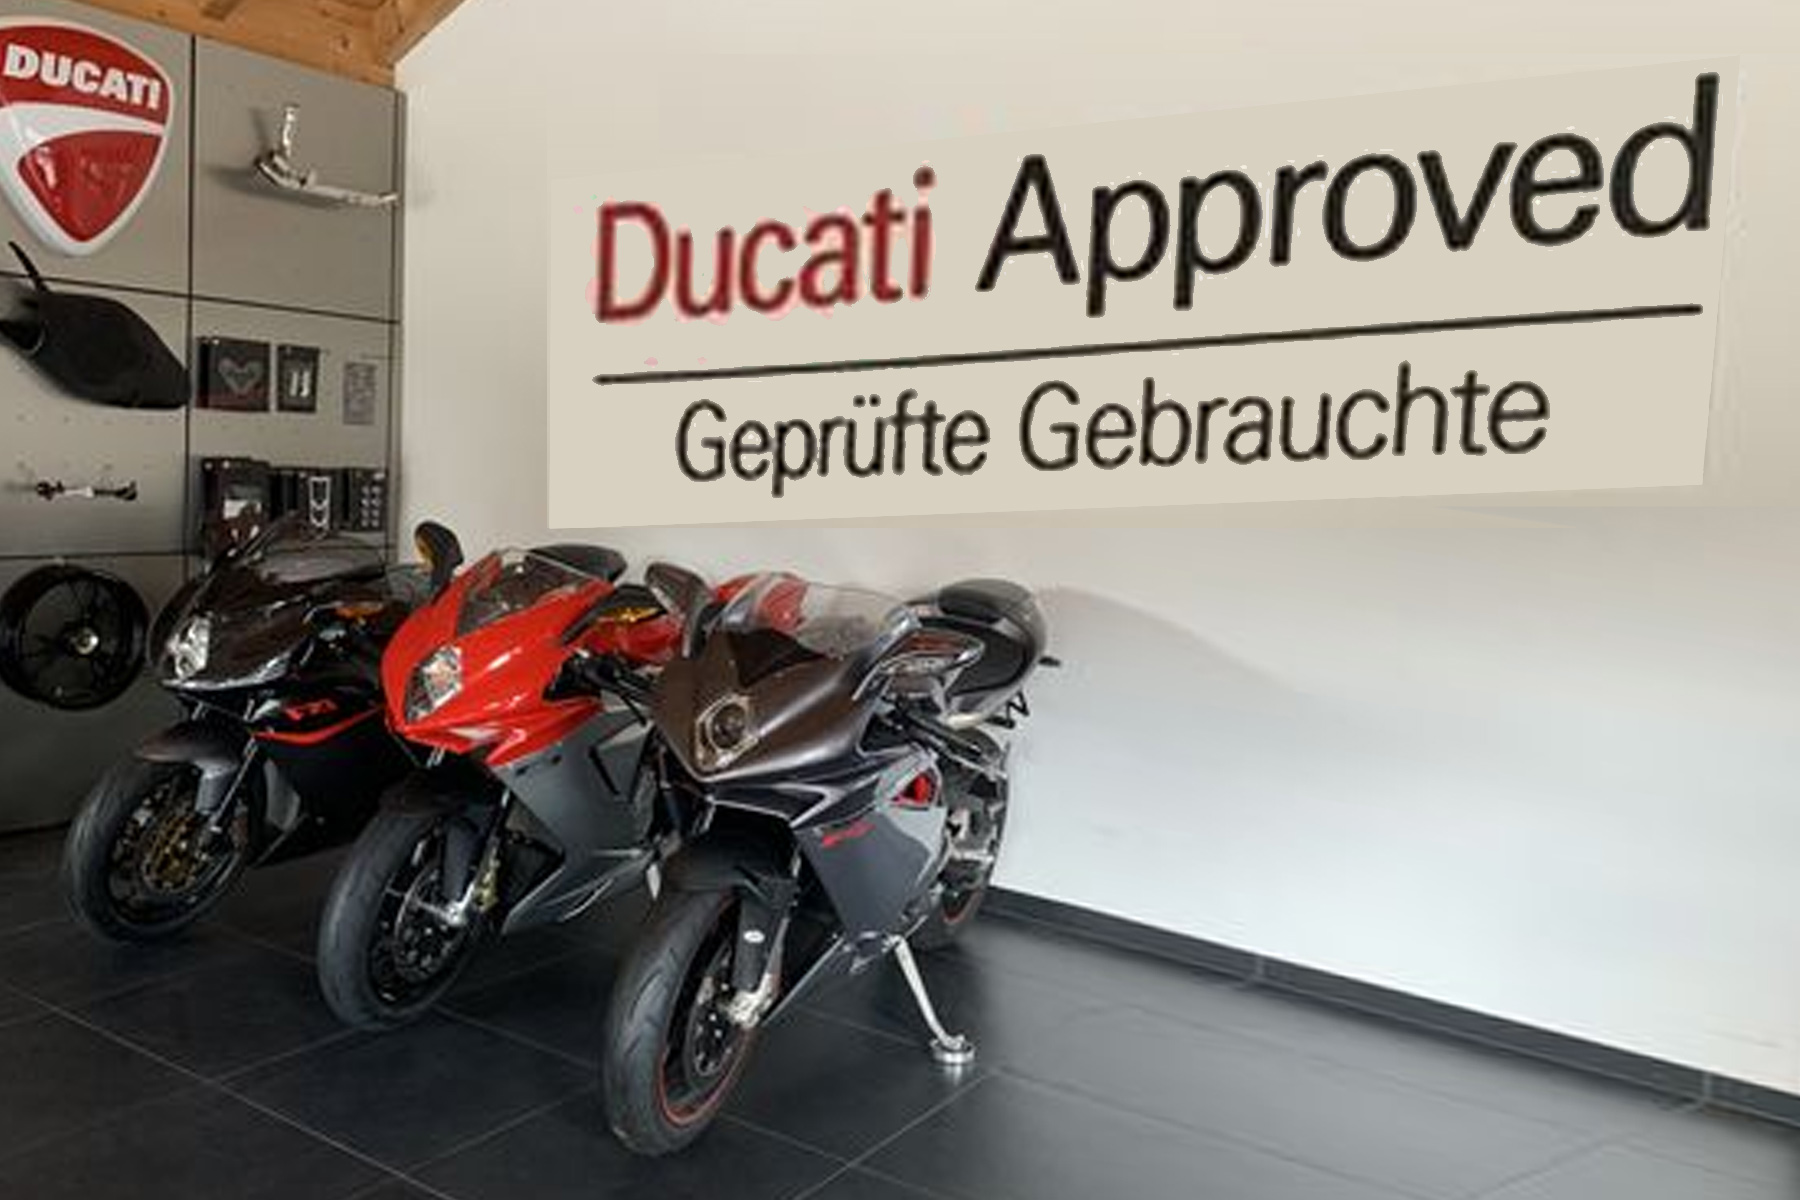 DUCATI APPROVED